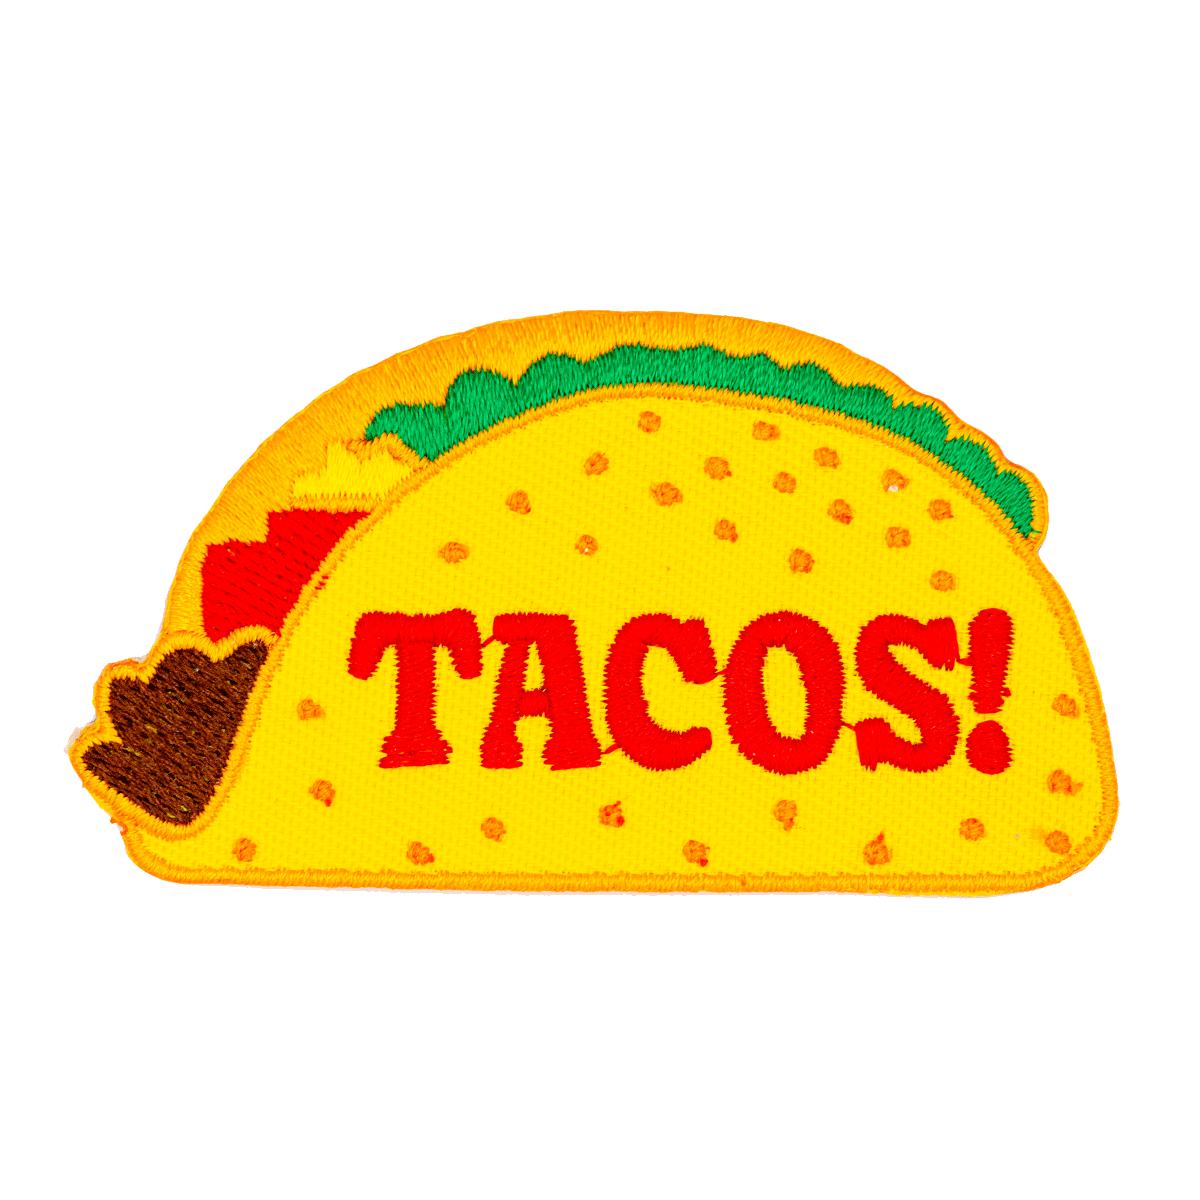 These Are Things-Tacos Iron-On Patch-accessory-gather here online